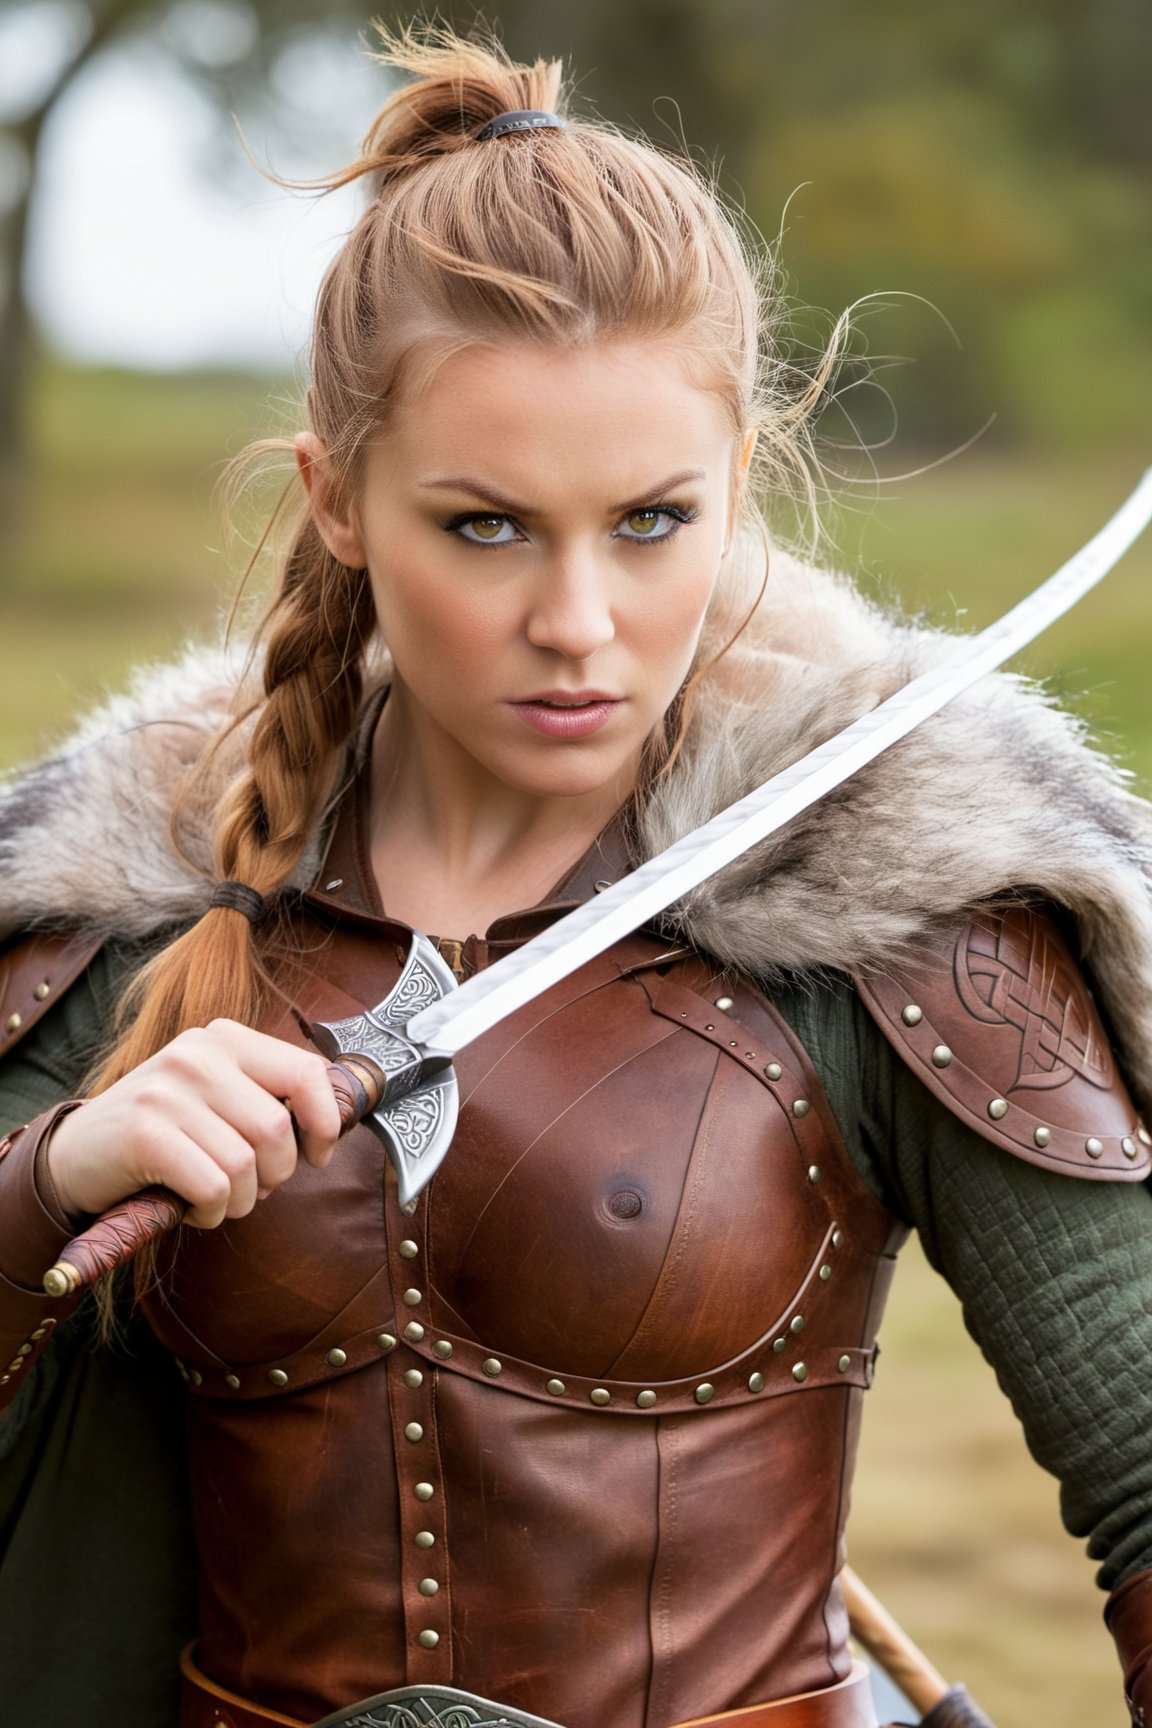 (Portrait of a fierce and fearsome Celtic warrior in battle),  (action shot photo),  (portrait),  (fearsome),  (furs coat),  (ginger curl short hair),  (holding an arrowbow),  (silver eyes),  (serious face,  angry,  mad),  (Epic hero),  (Symmetric),  (Cinematic,  vikings series style),  (photorealistic fantasy art),  (cinematic,  realistic),  (inspirational image),  (digital art),  (viking armor),  (amber tone),  (vikings mythology),  (ambient lighting),  (bokeh).,<lora:EMS-86913-EMS:0.800000>